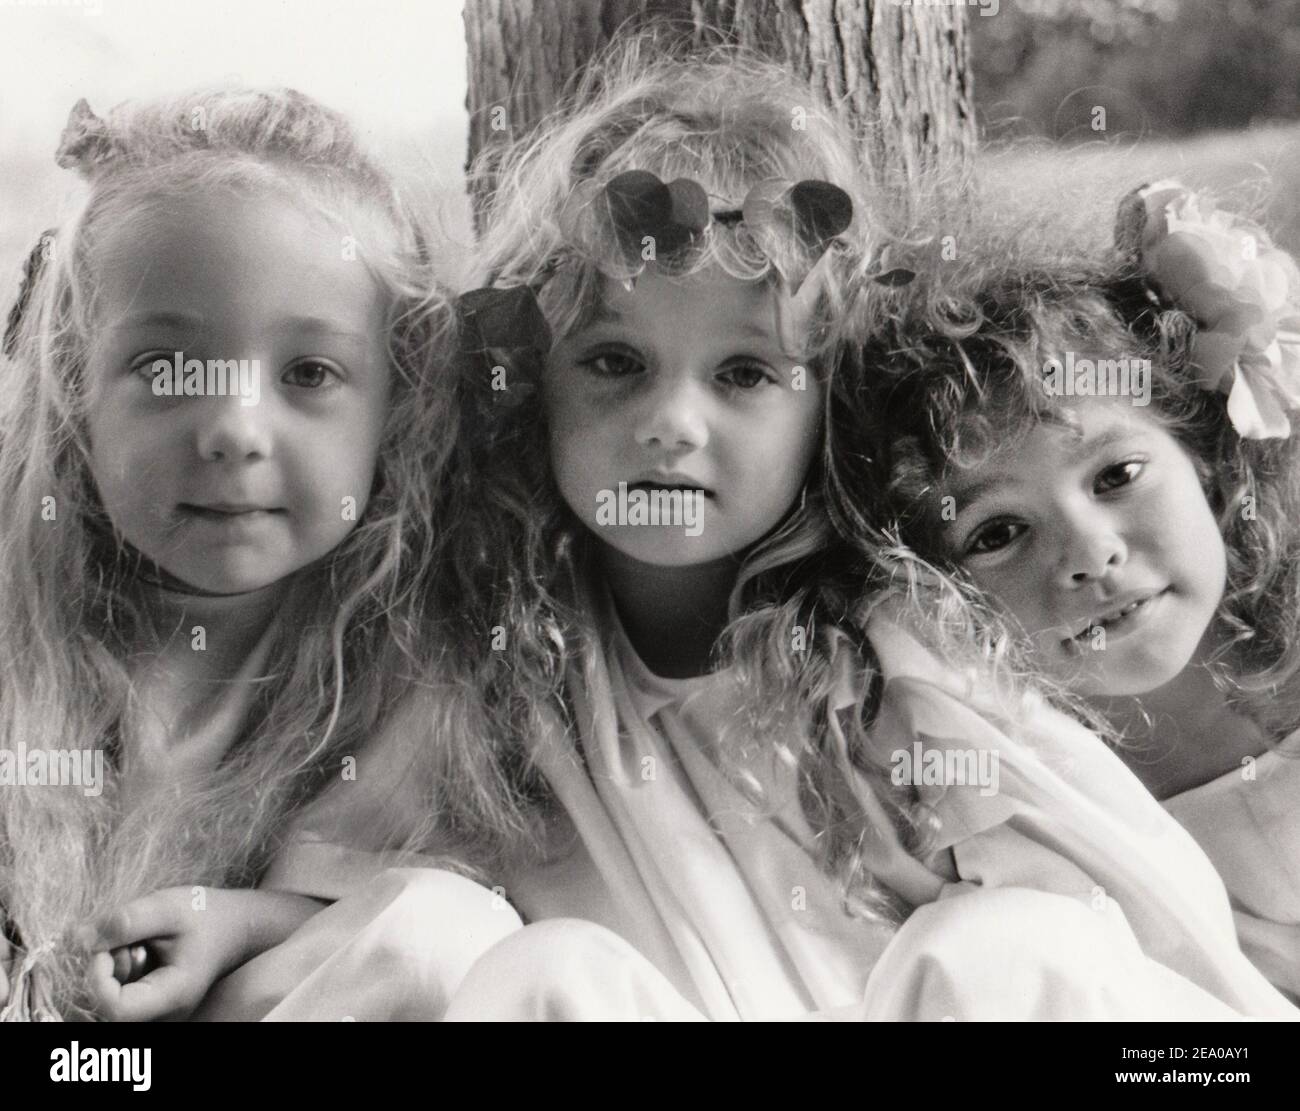 scanned monochrome grainy print of three little girls in the style of Julia Margaret Cameron Stock Photo